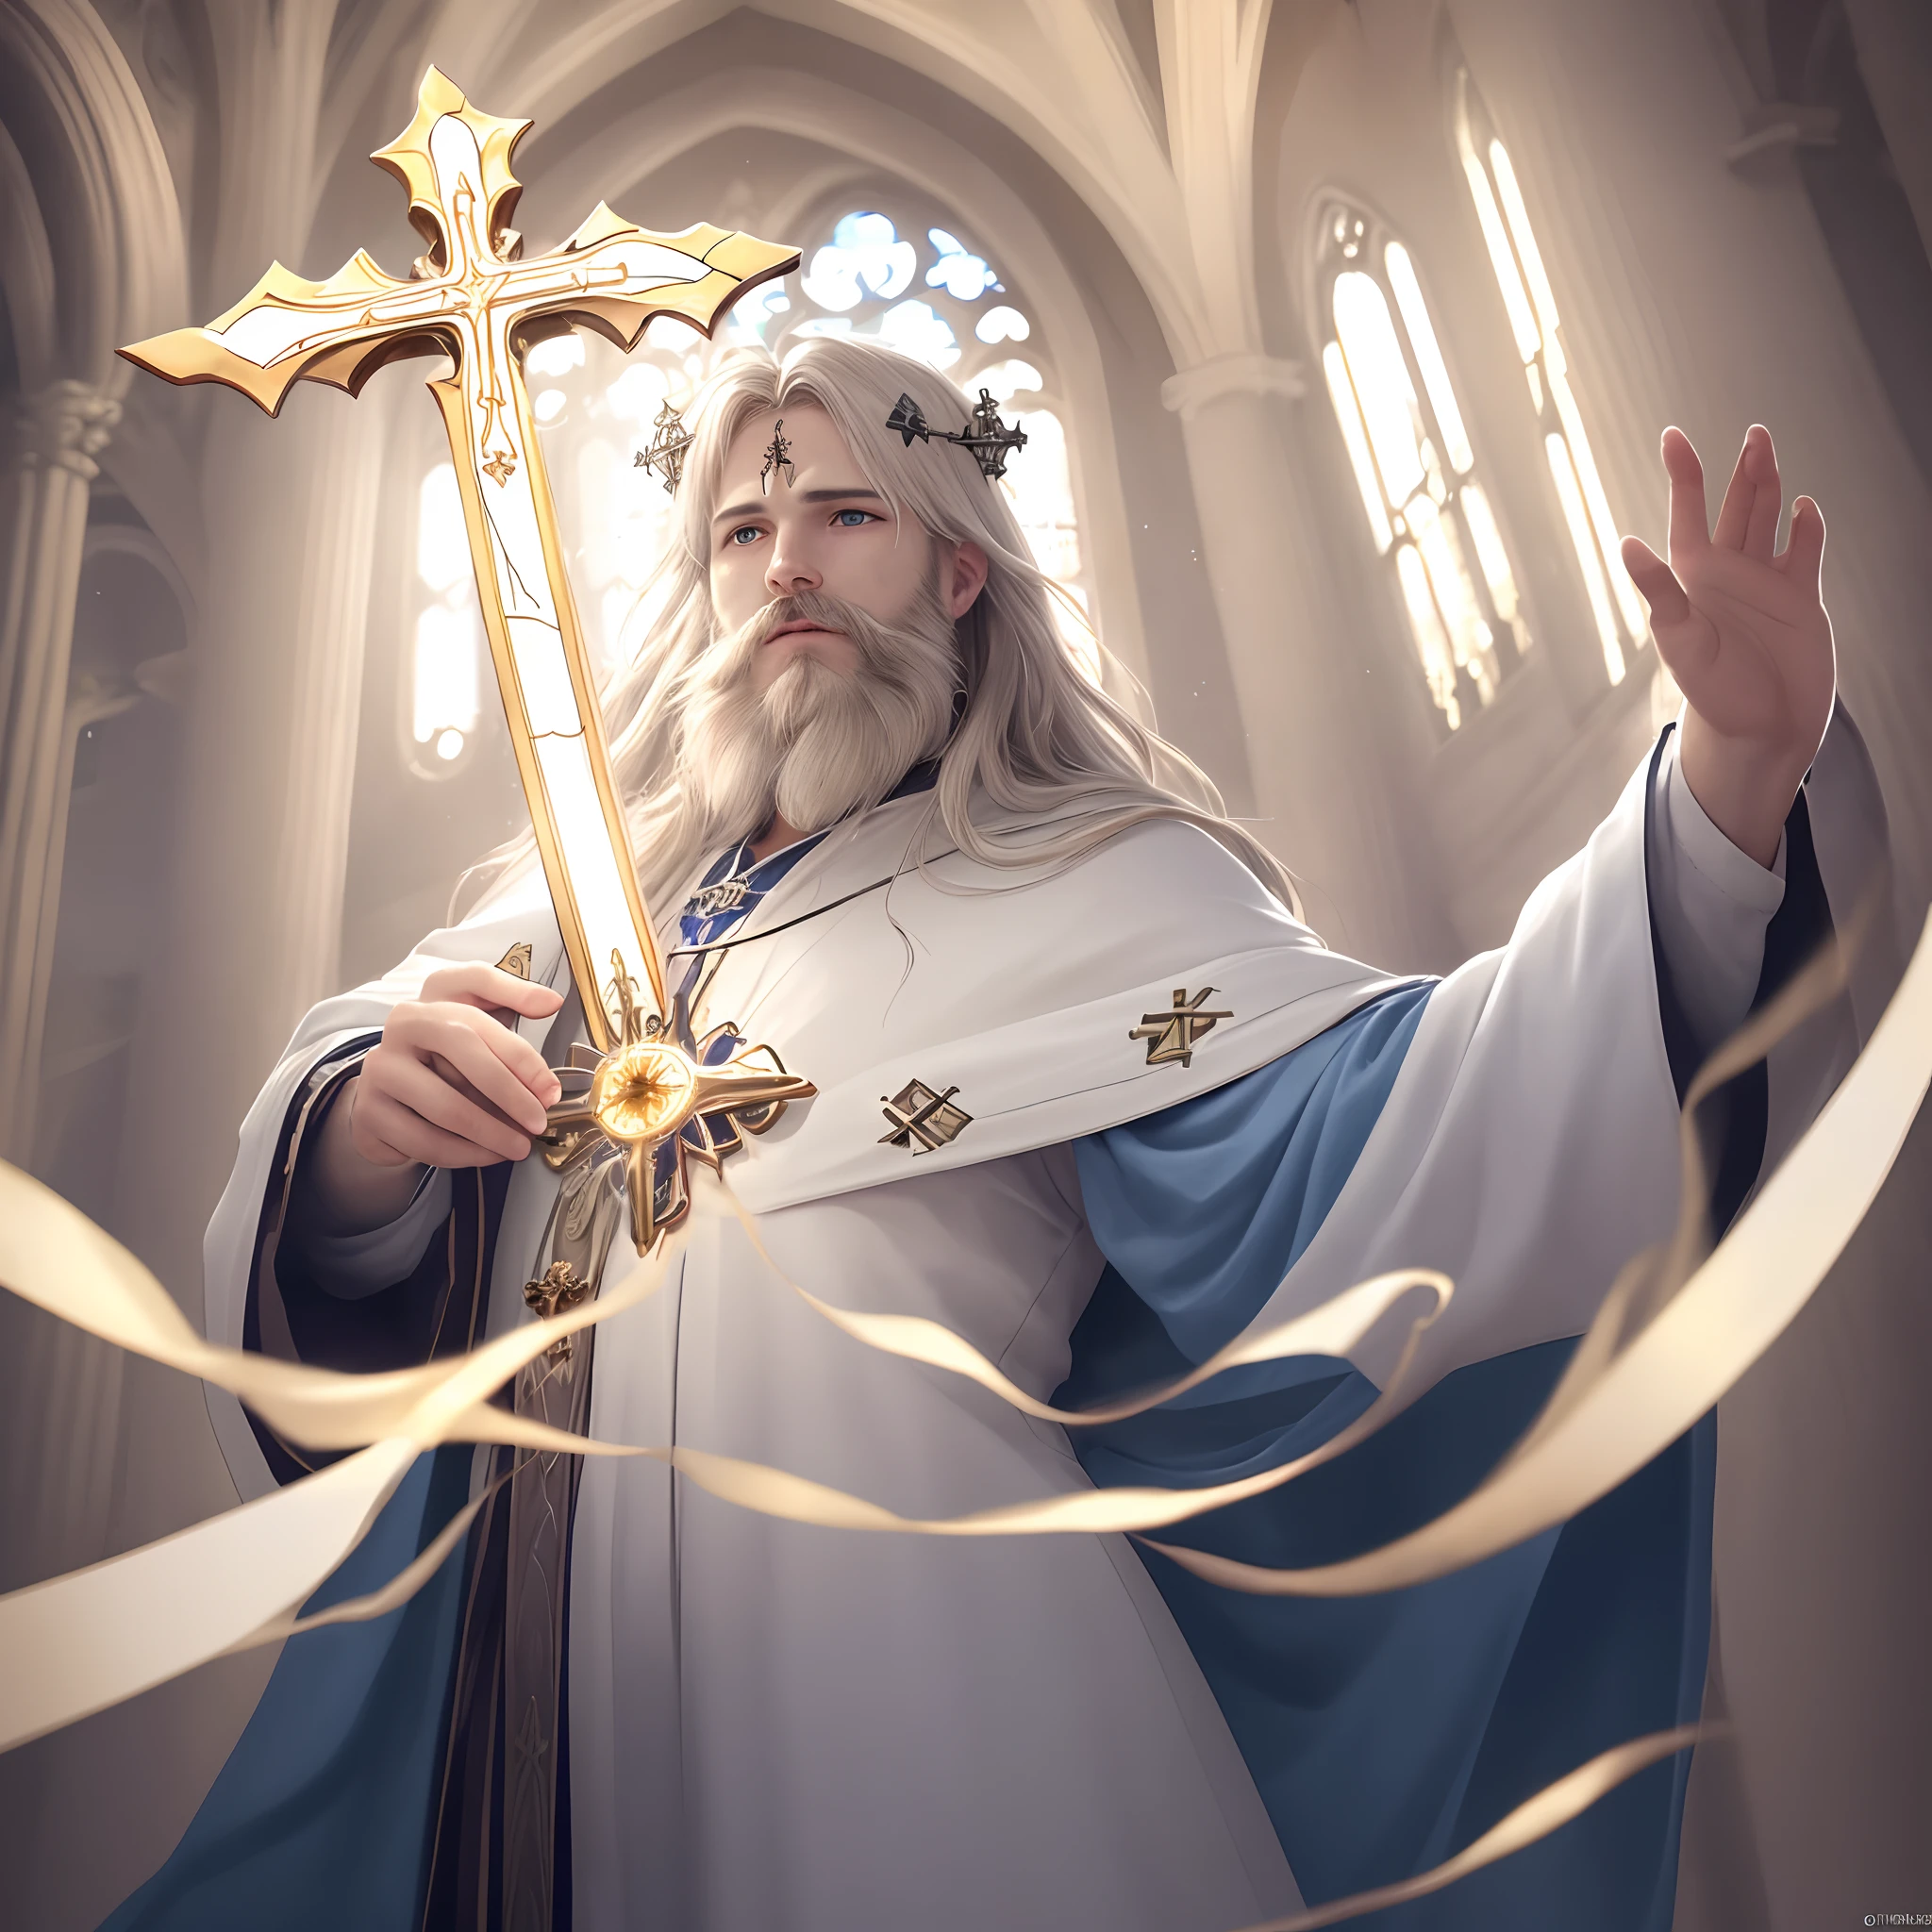 (extremely detailed CG unity 8k wallpaper, masterpiece, best quality, ultra-detailed), best illumination, best shadow, an extremely delicate and beautiful, floating,
[(1 figure), white robe, crown of thorns, savior, (beard), (blue eyes), (divine light), hands outstretched, (nail wounds on hands), dramatic angle],
(stained glass window, holy cross, church), (vastness), (sacred atmosphere).